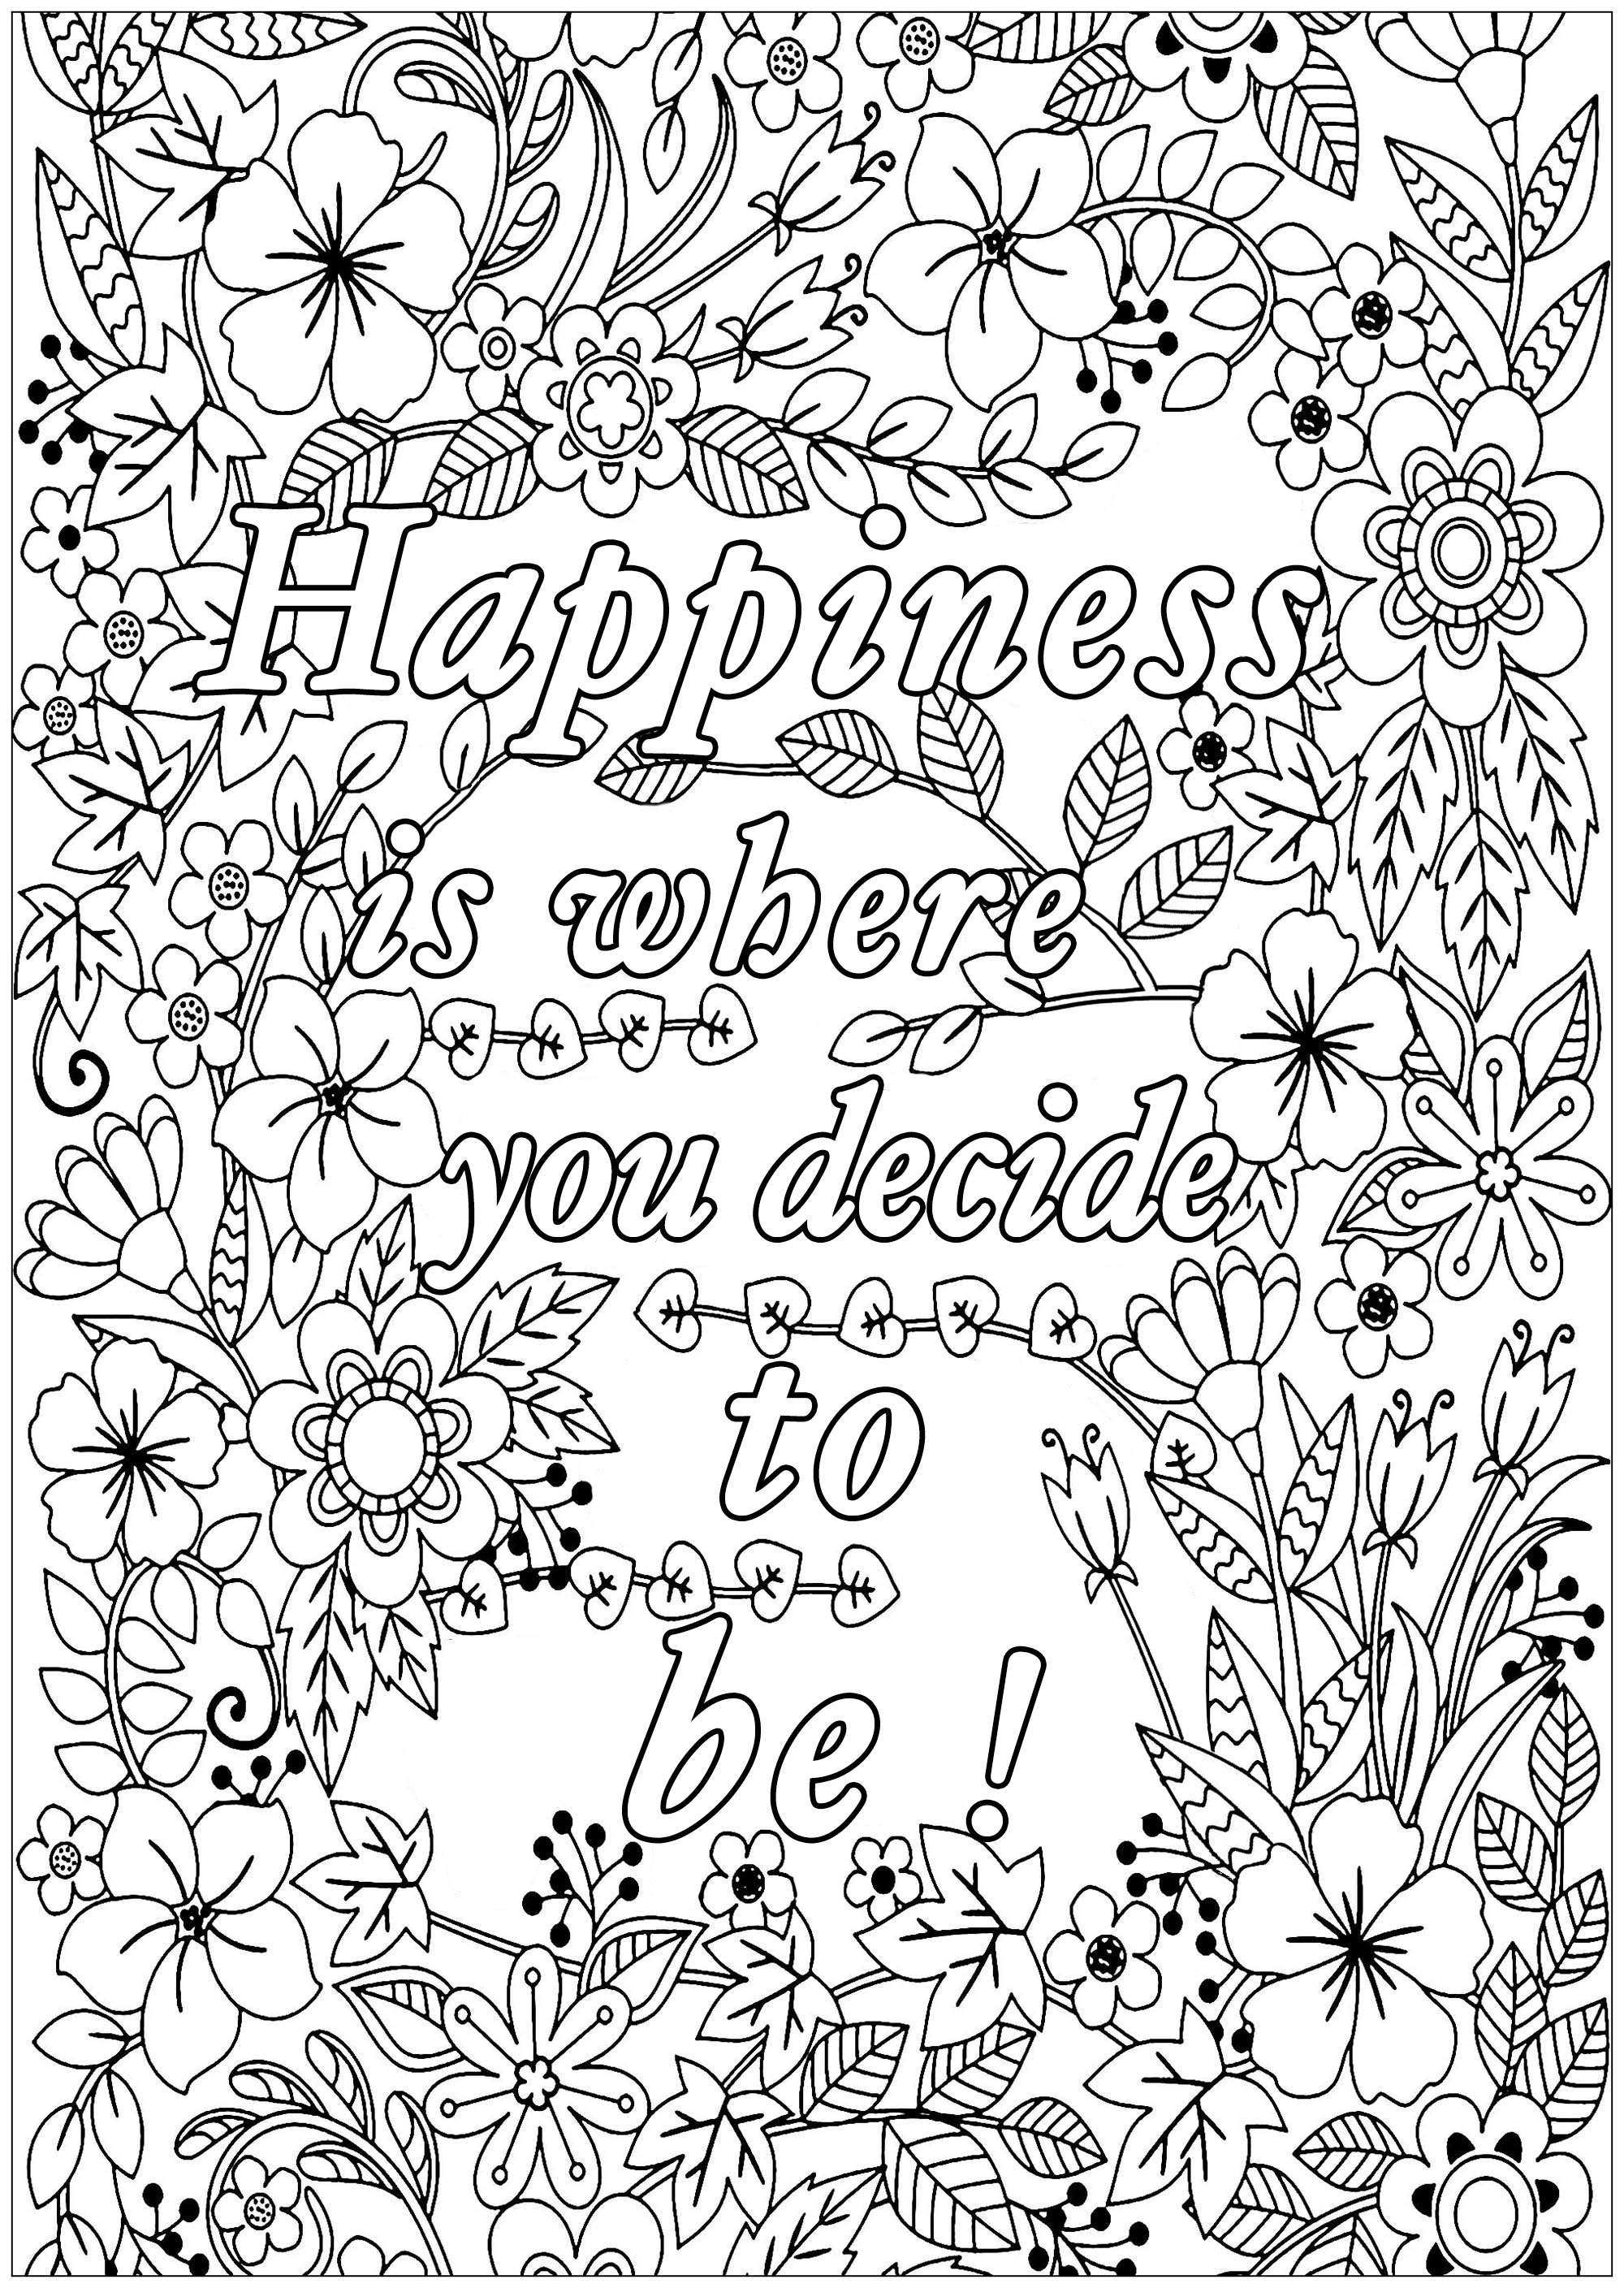 Download Happiness Is Where You Decide To Be Positive Inspiring Quotes Adult Coloring Pages